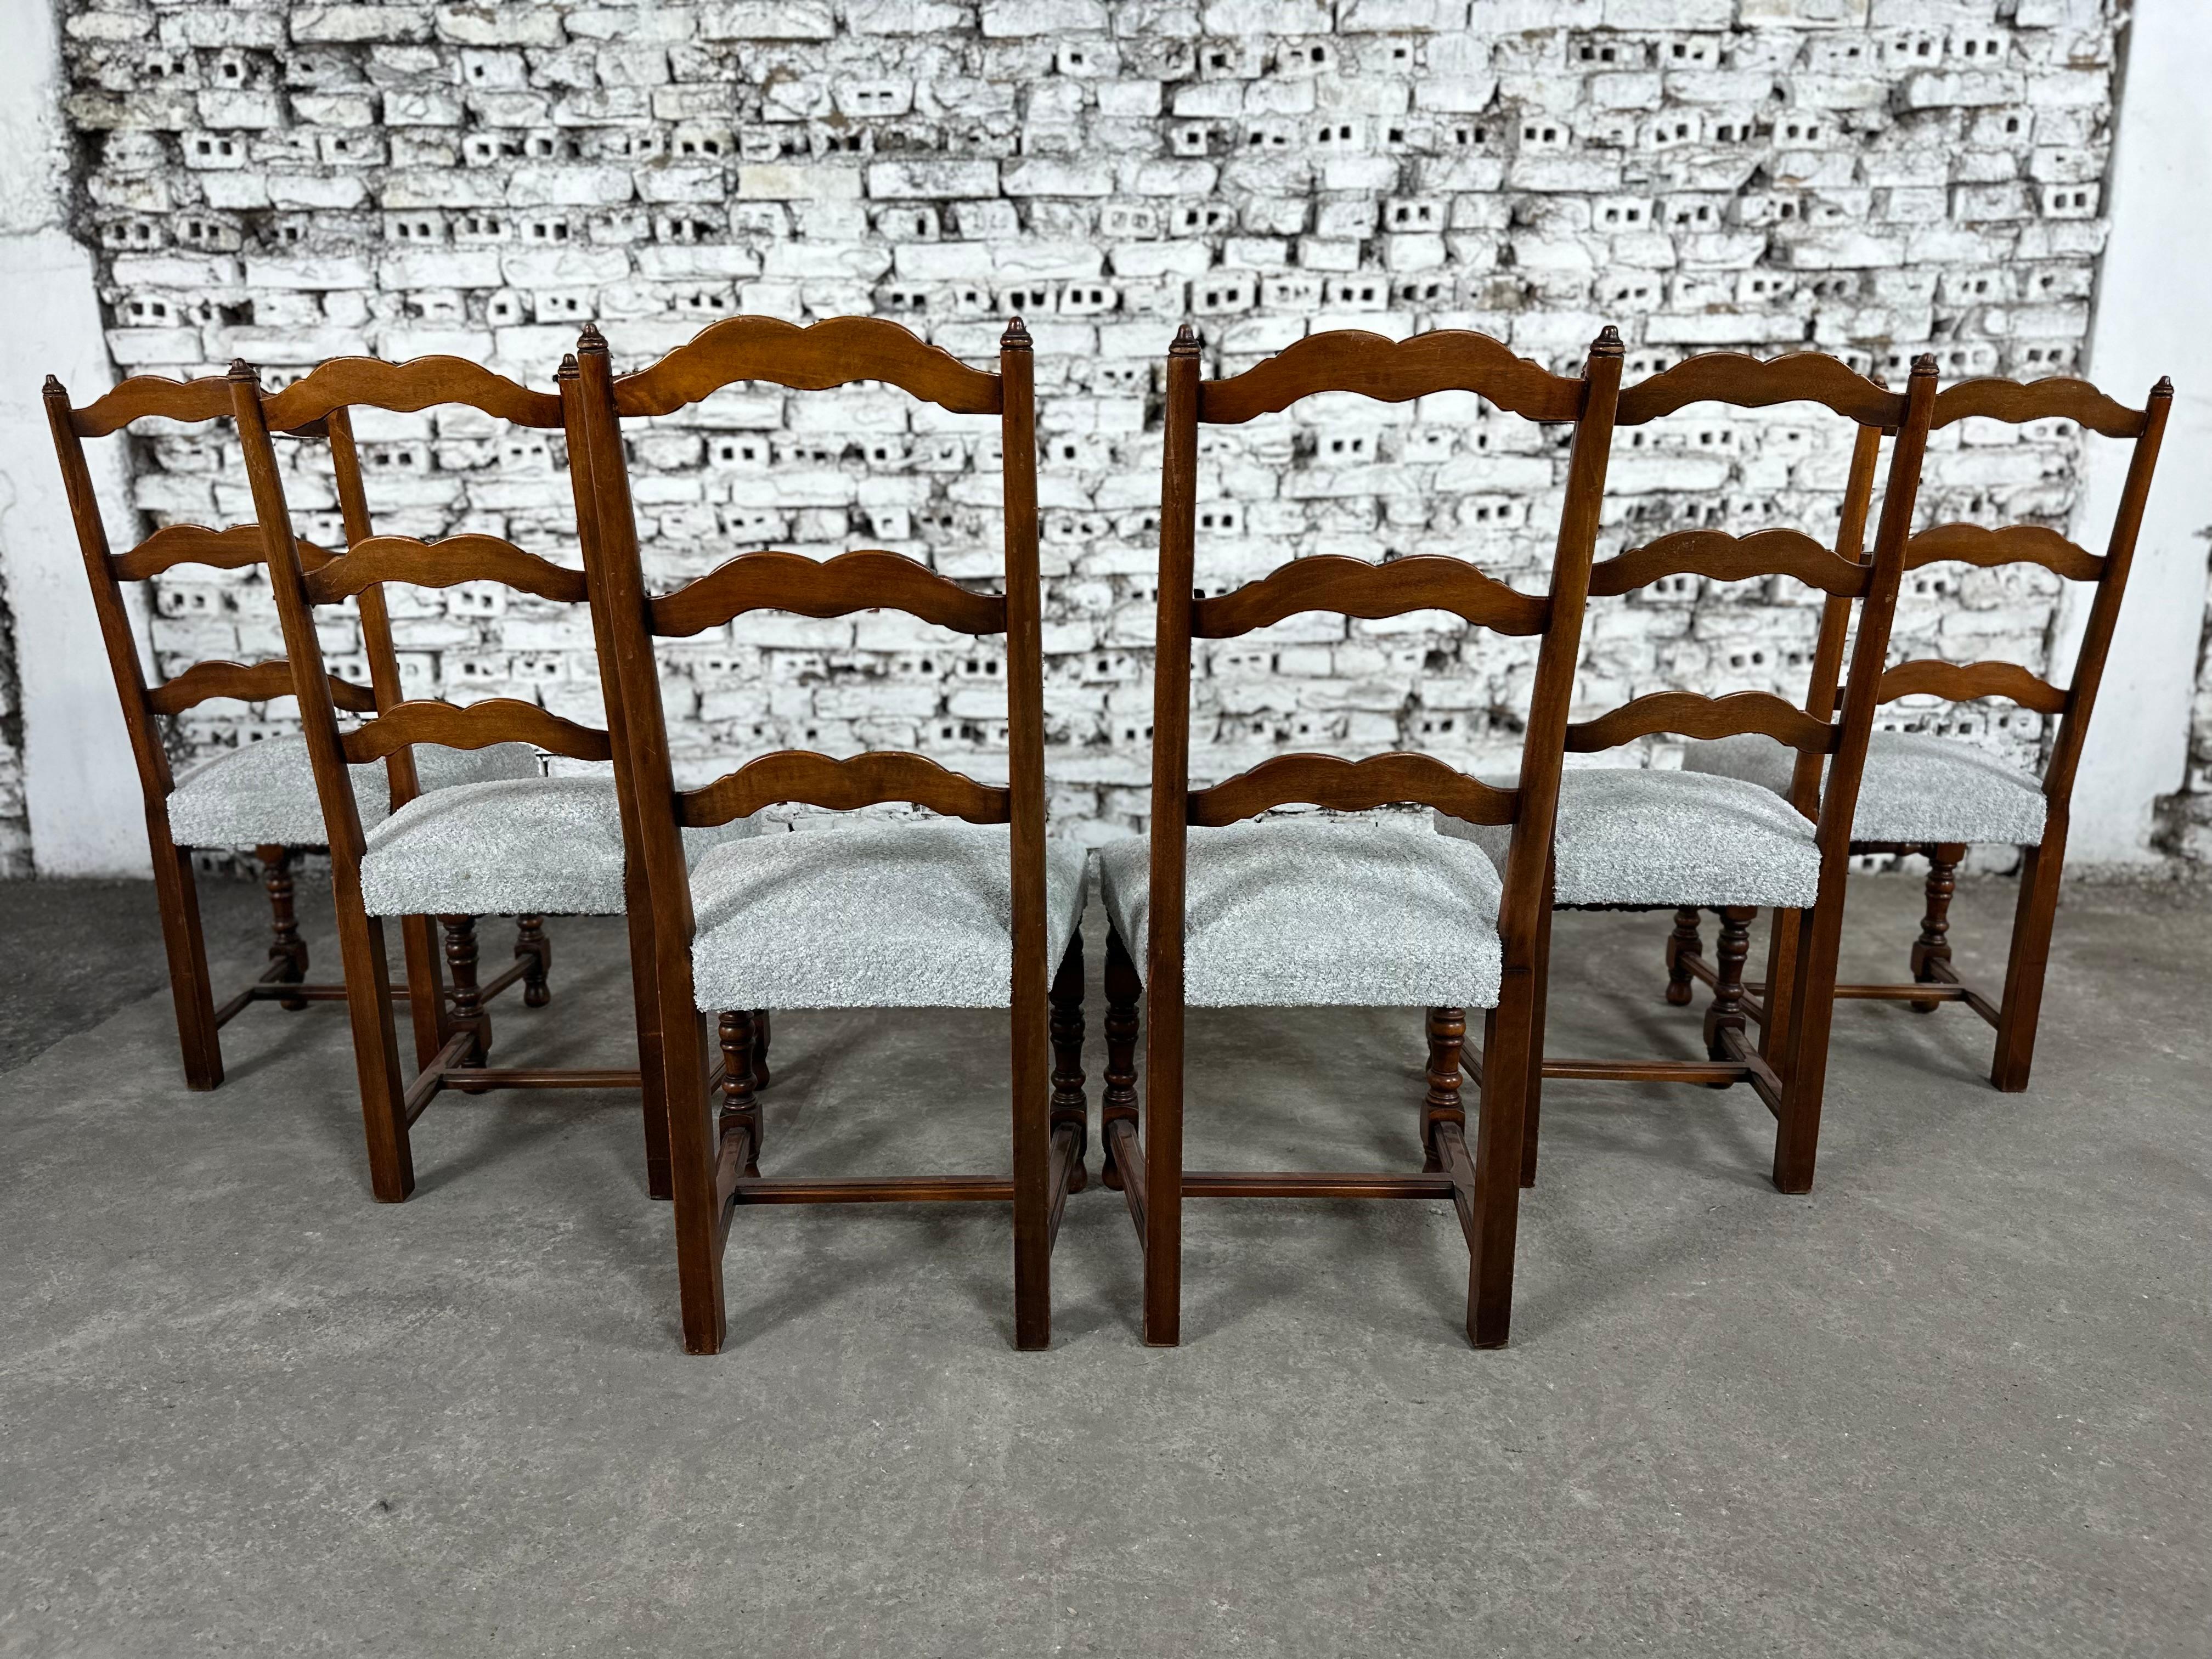 Reupholstered French Country Ladder Back Dining Chairs - Set of 6 4